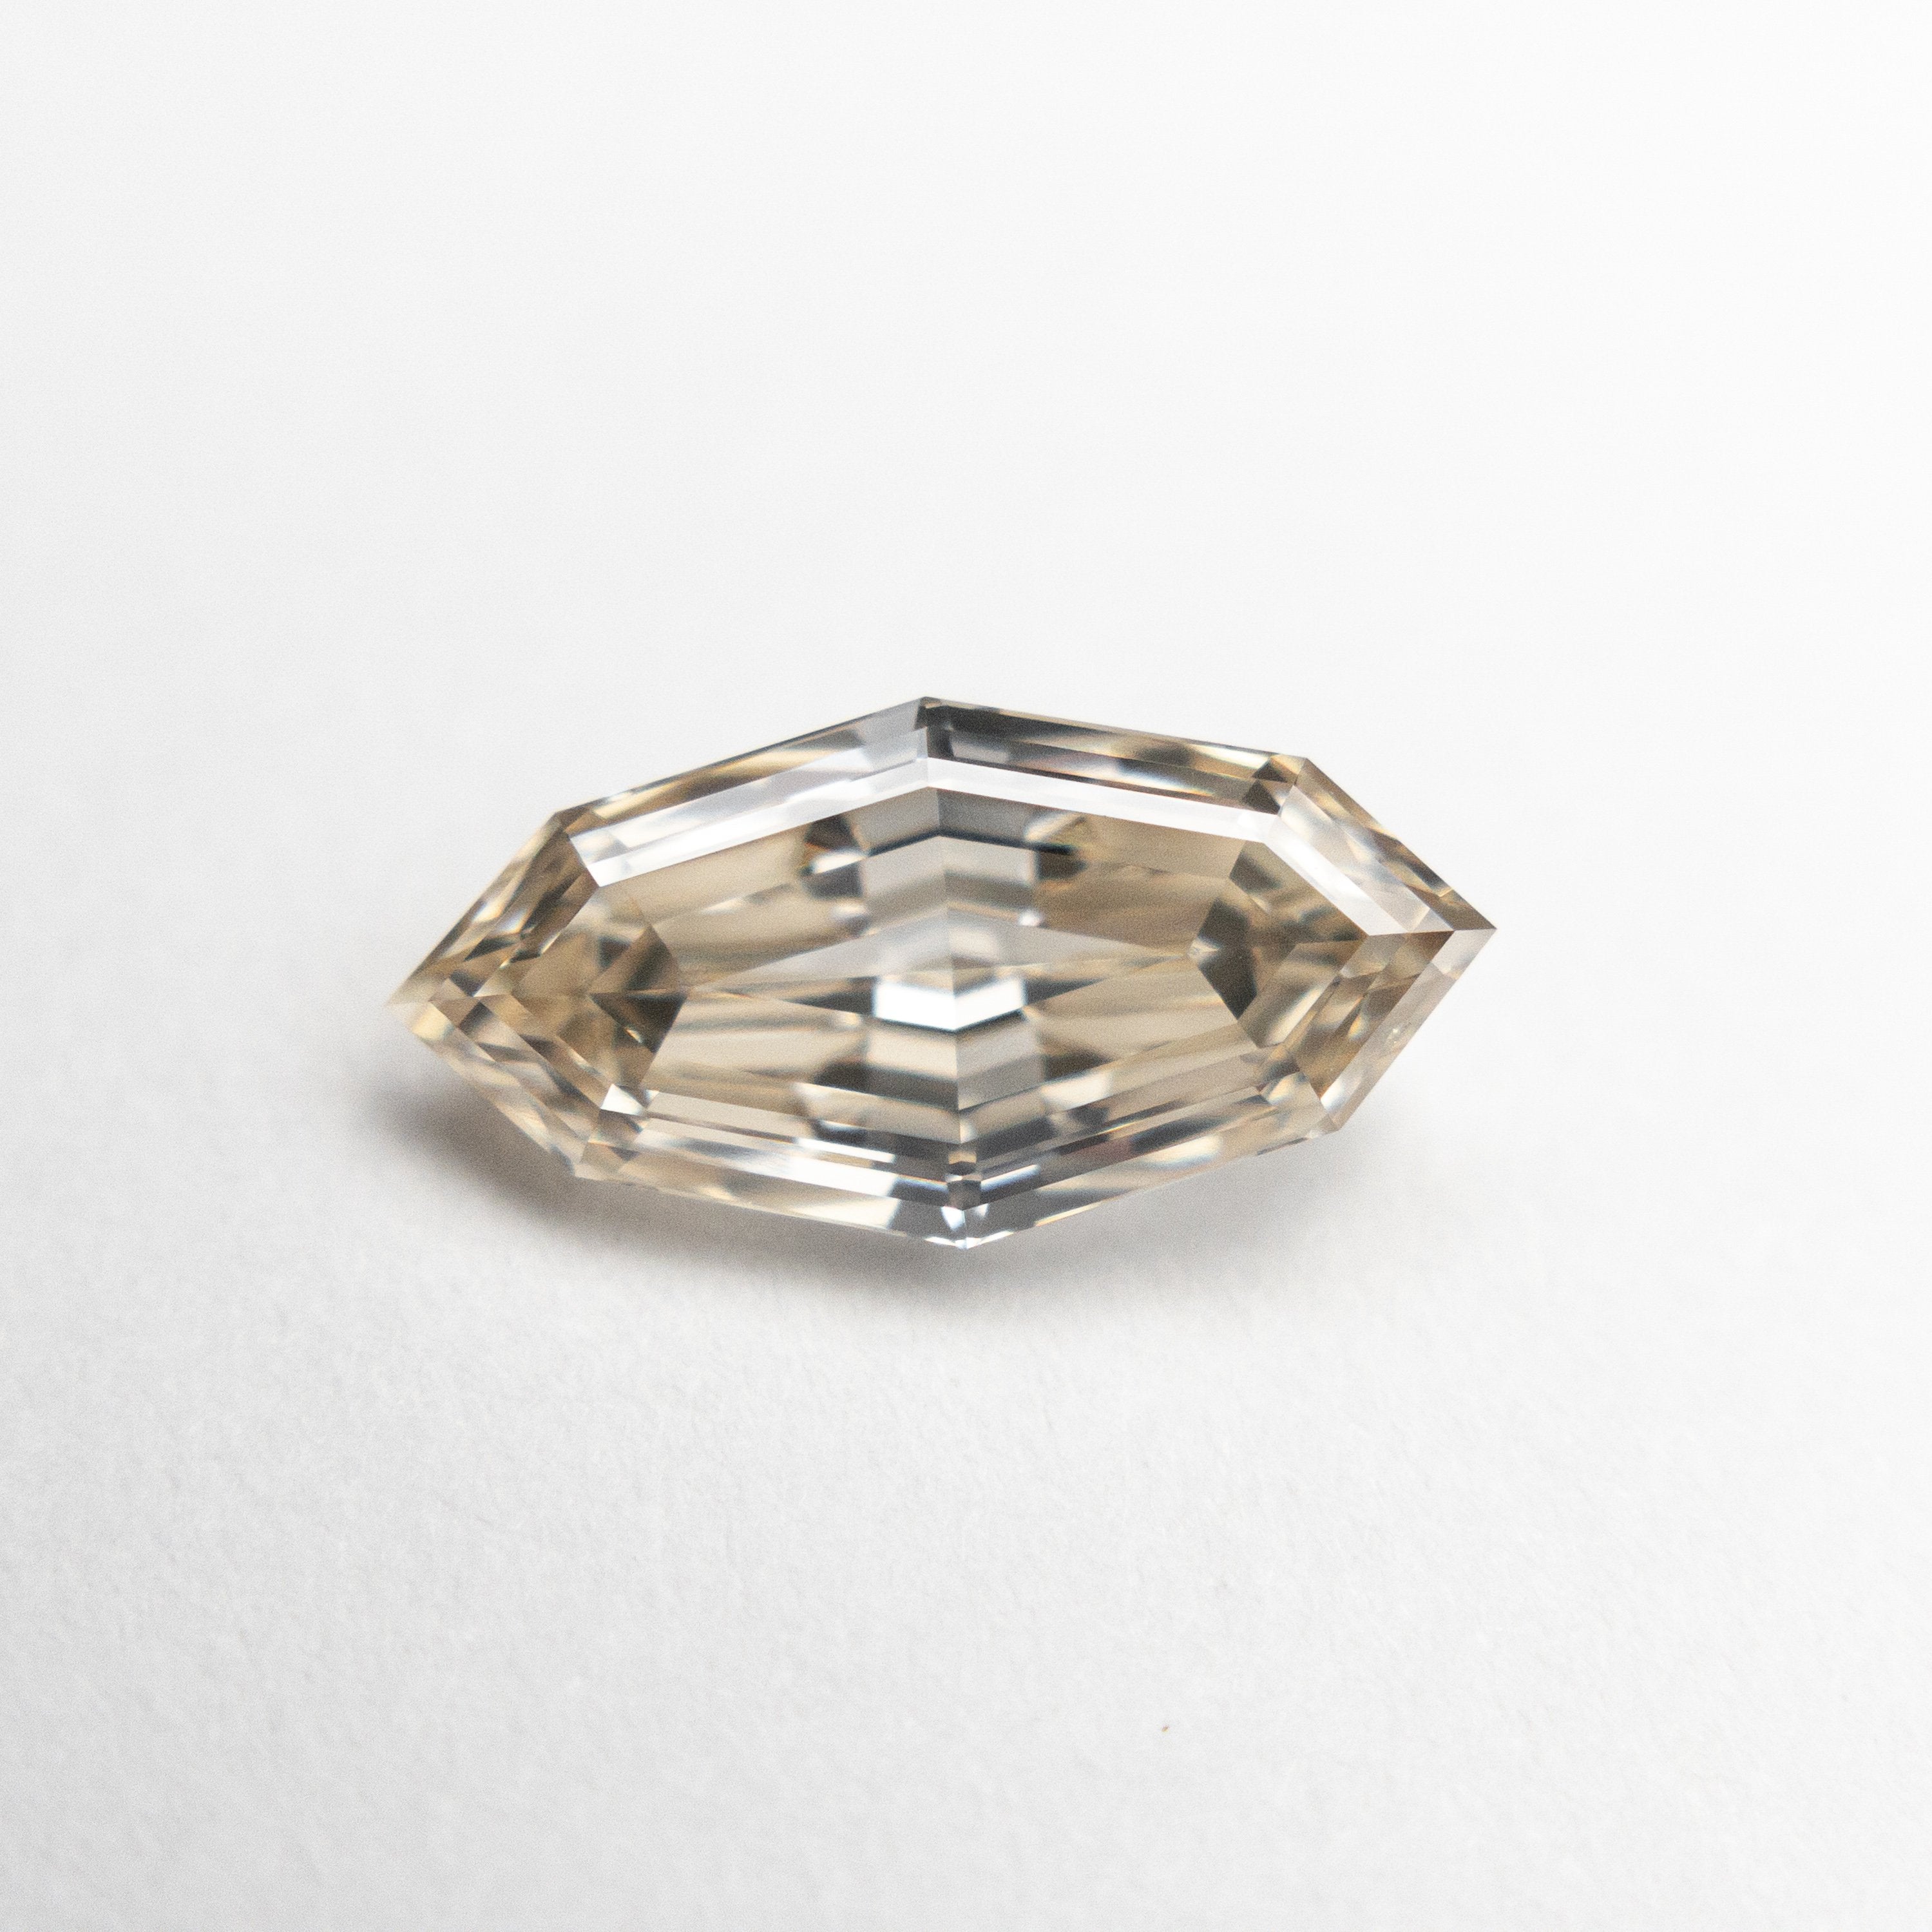 1.13ct 10.49x5.20x2.94mm VS2 Champagne Step Cut Marquise 18839-01 HOLD D2380